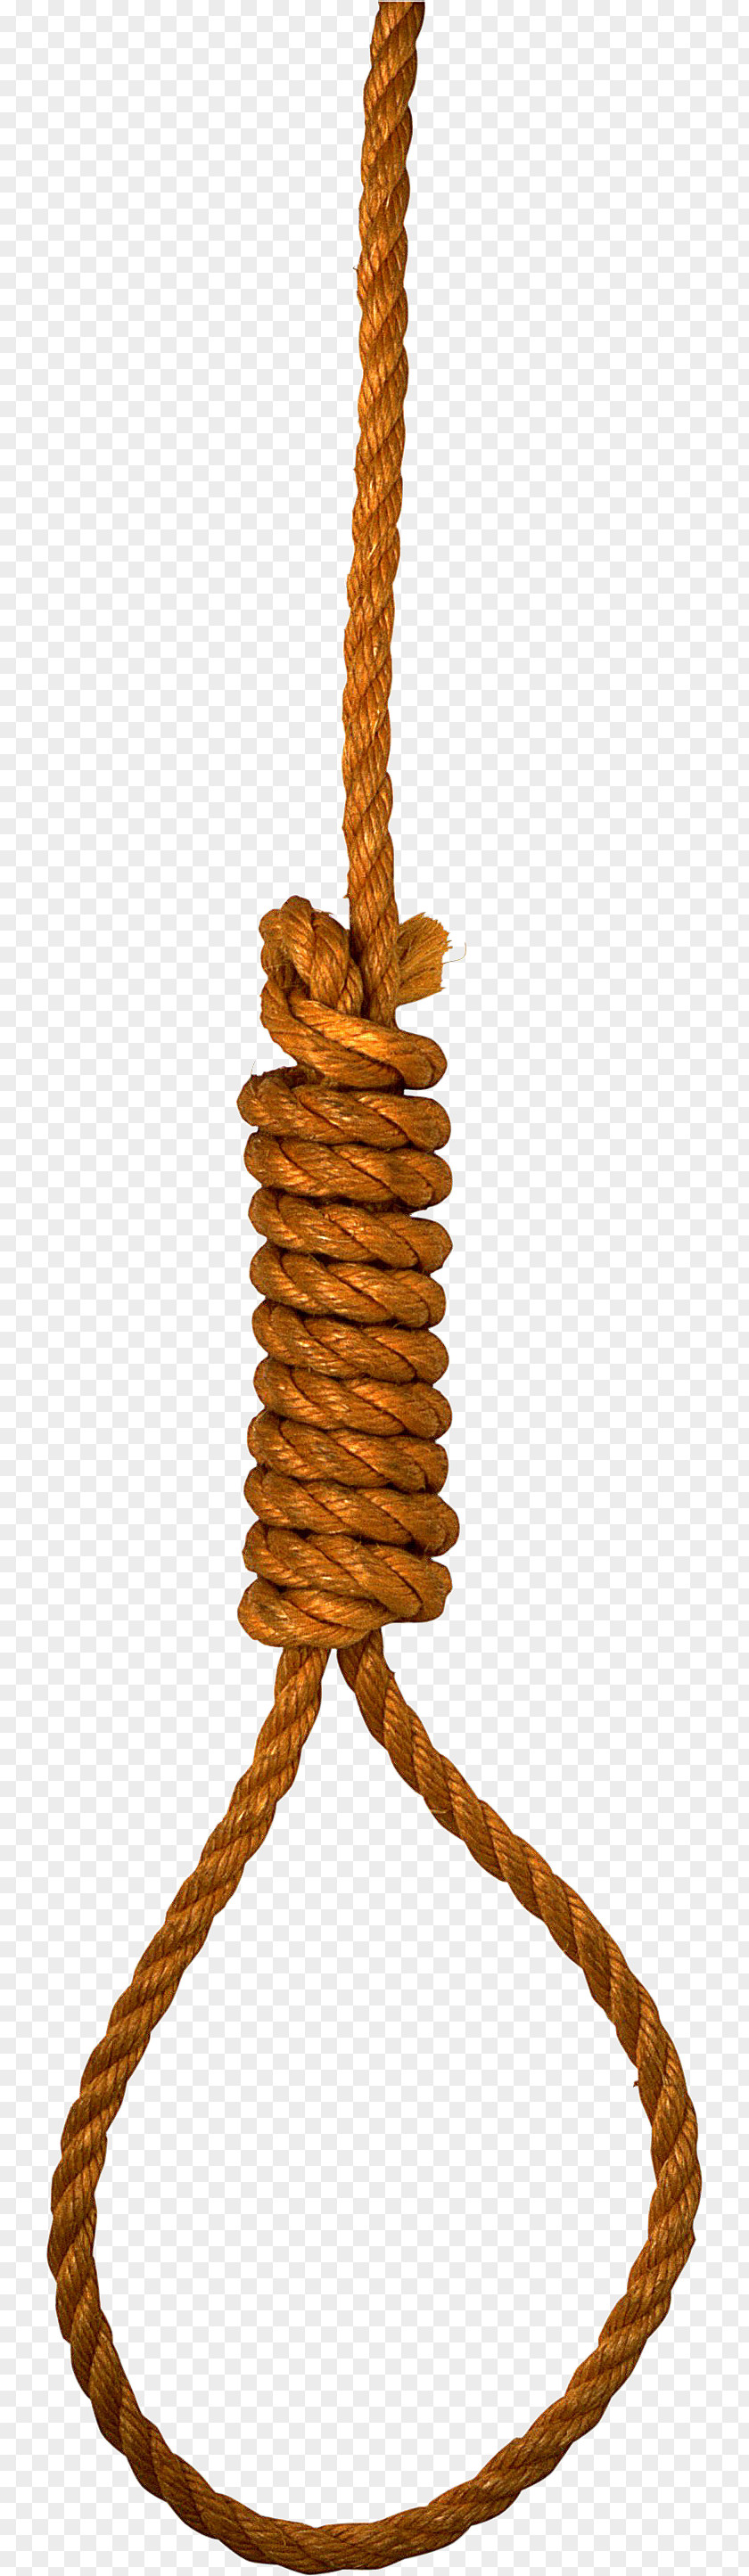 Rope PNG clipart PNG